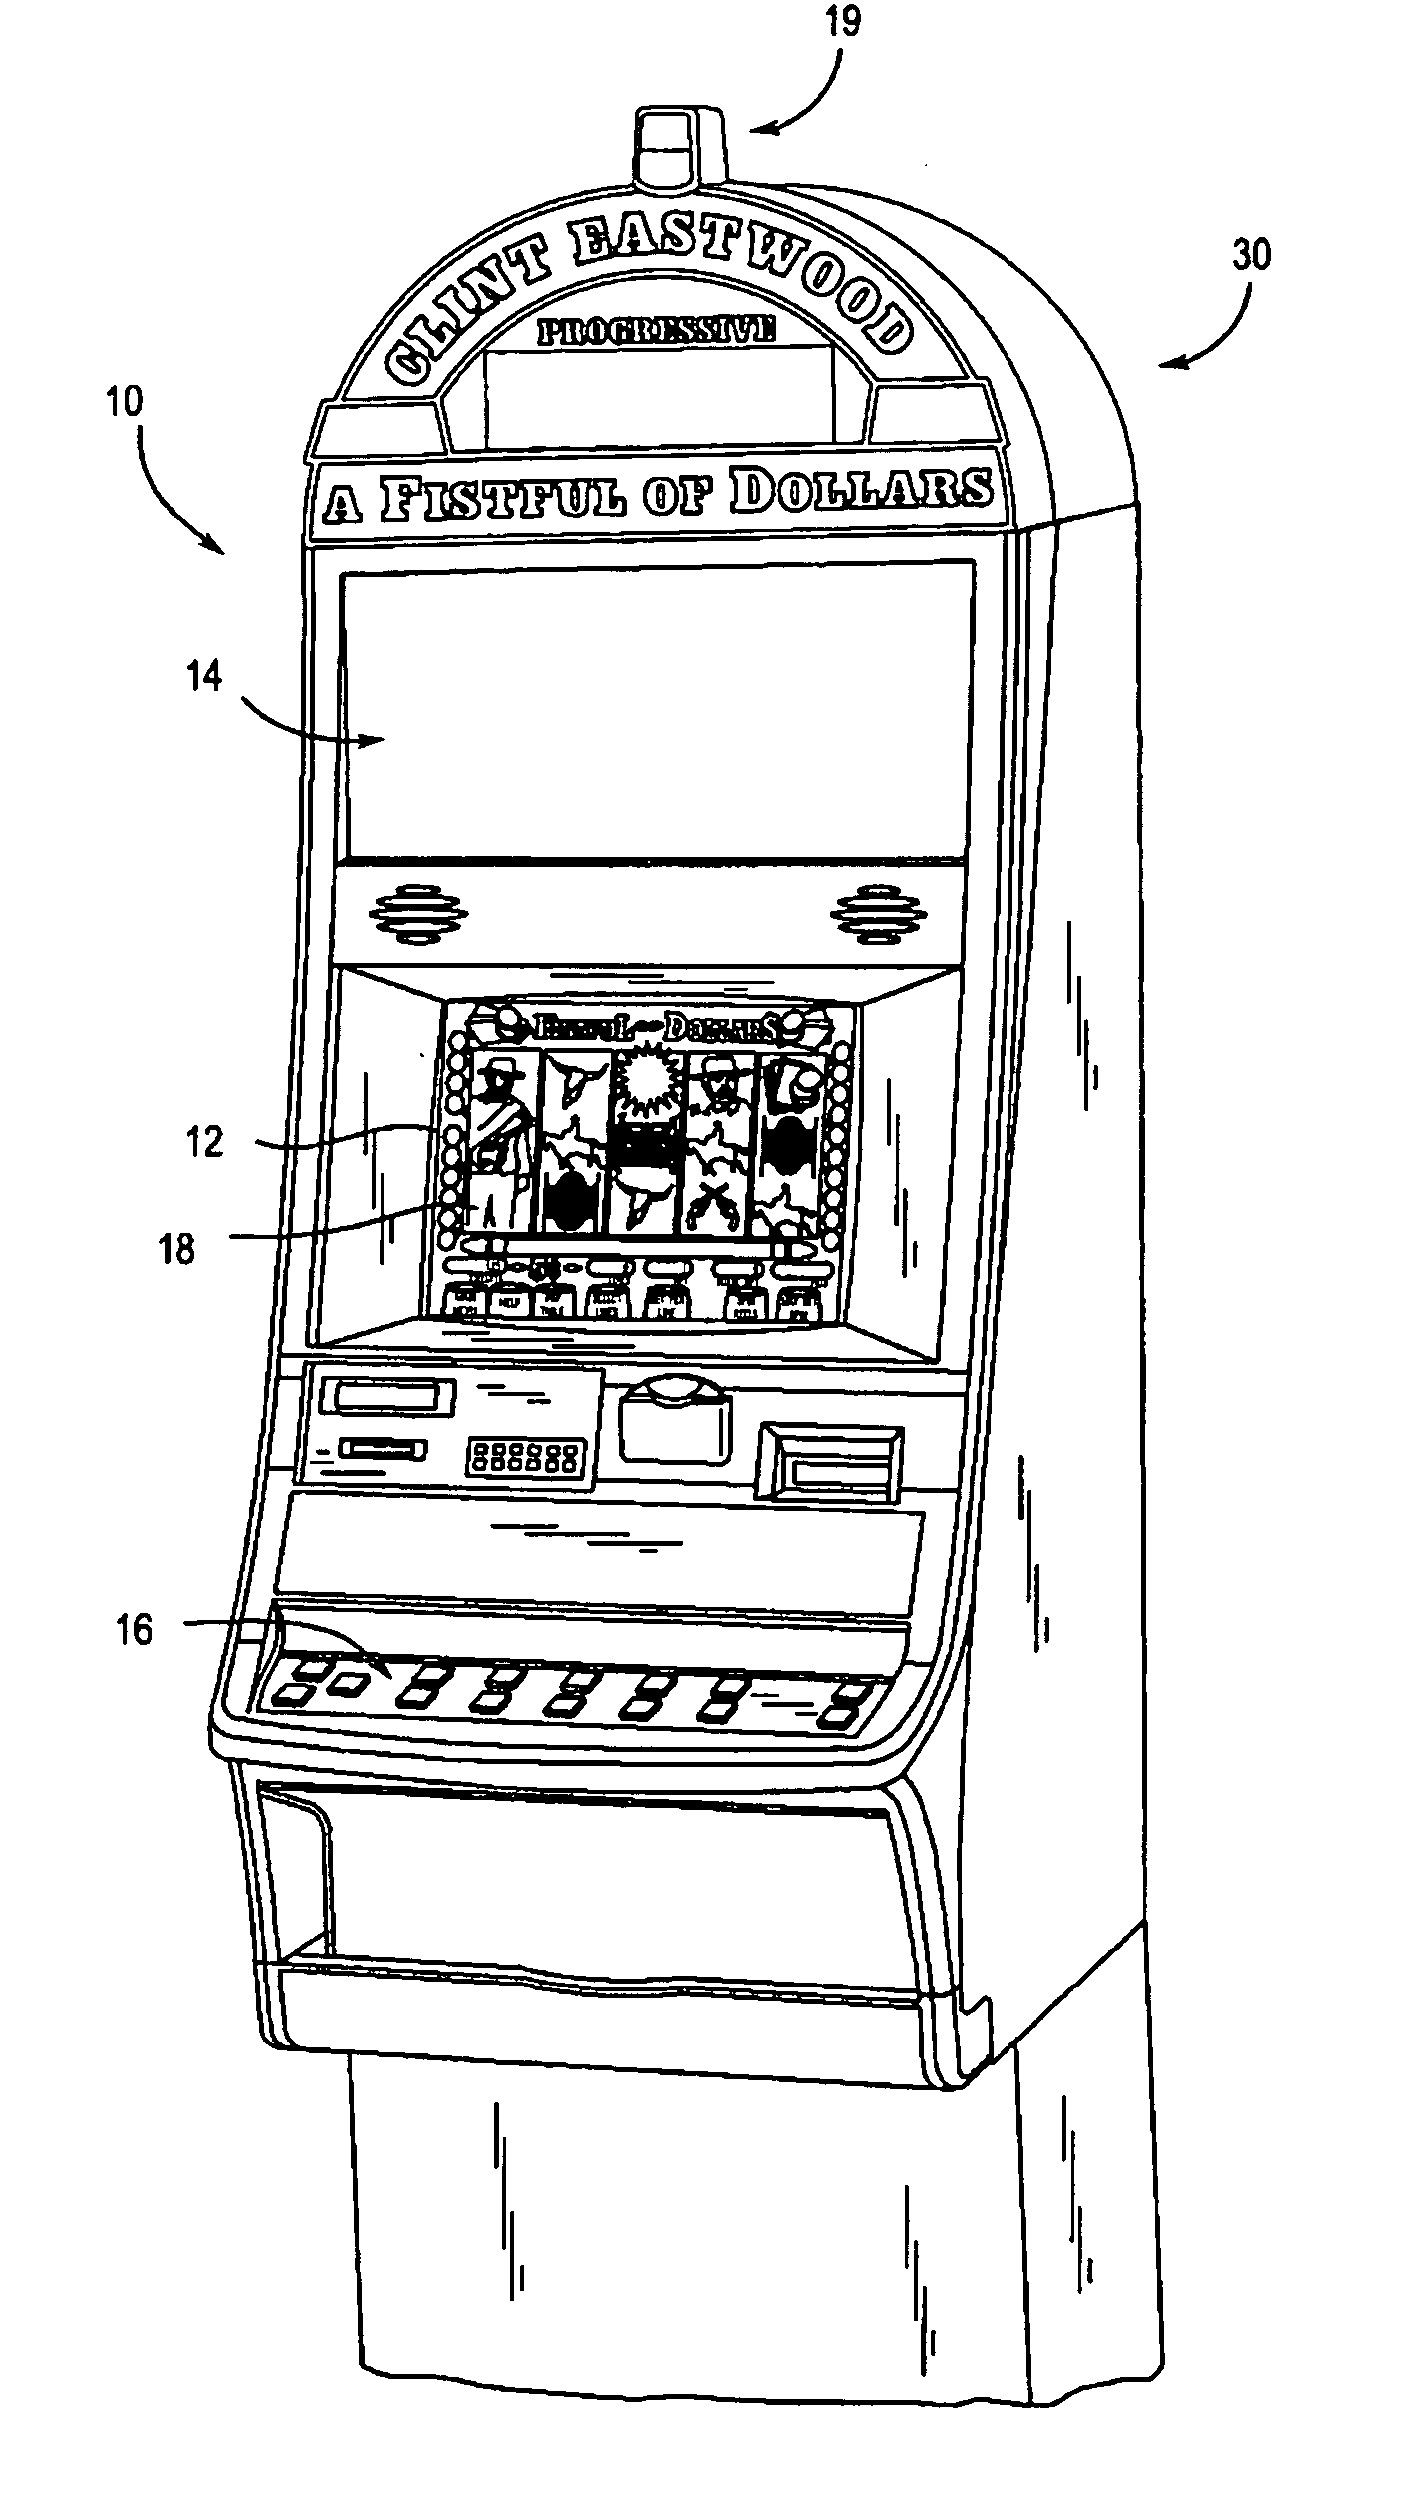 Gaming machine with light altering features